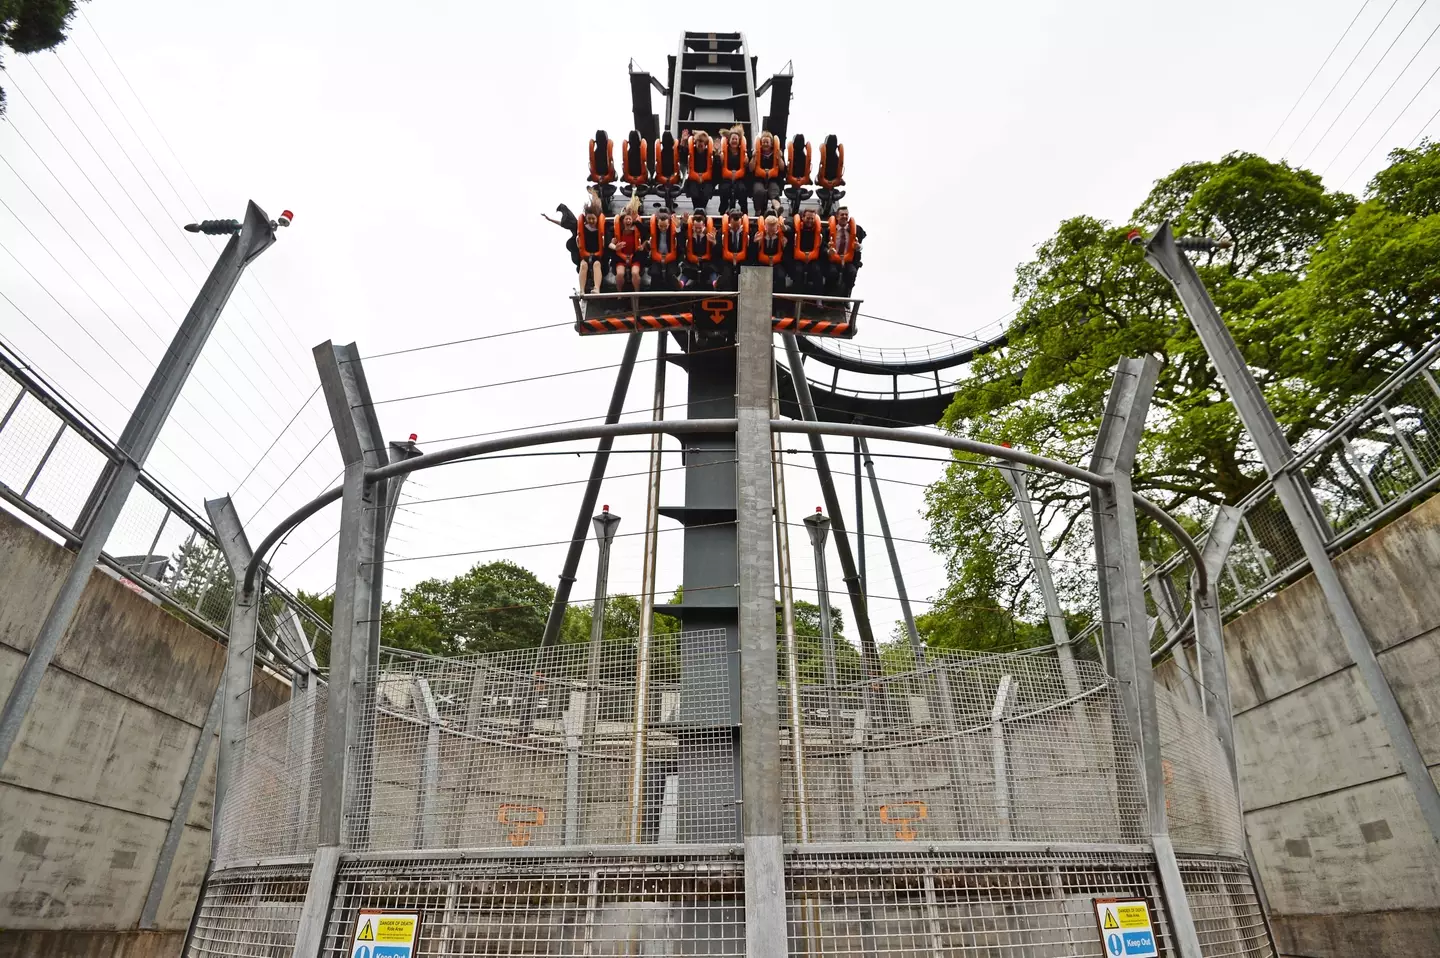 Oblivion is the world's first vertical rollercoaster.